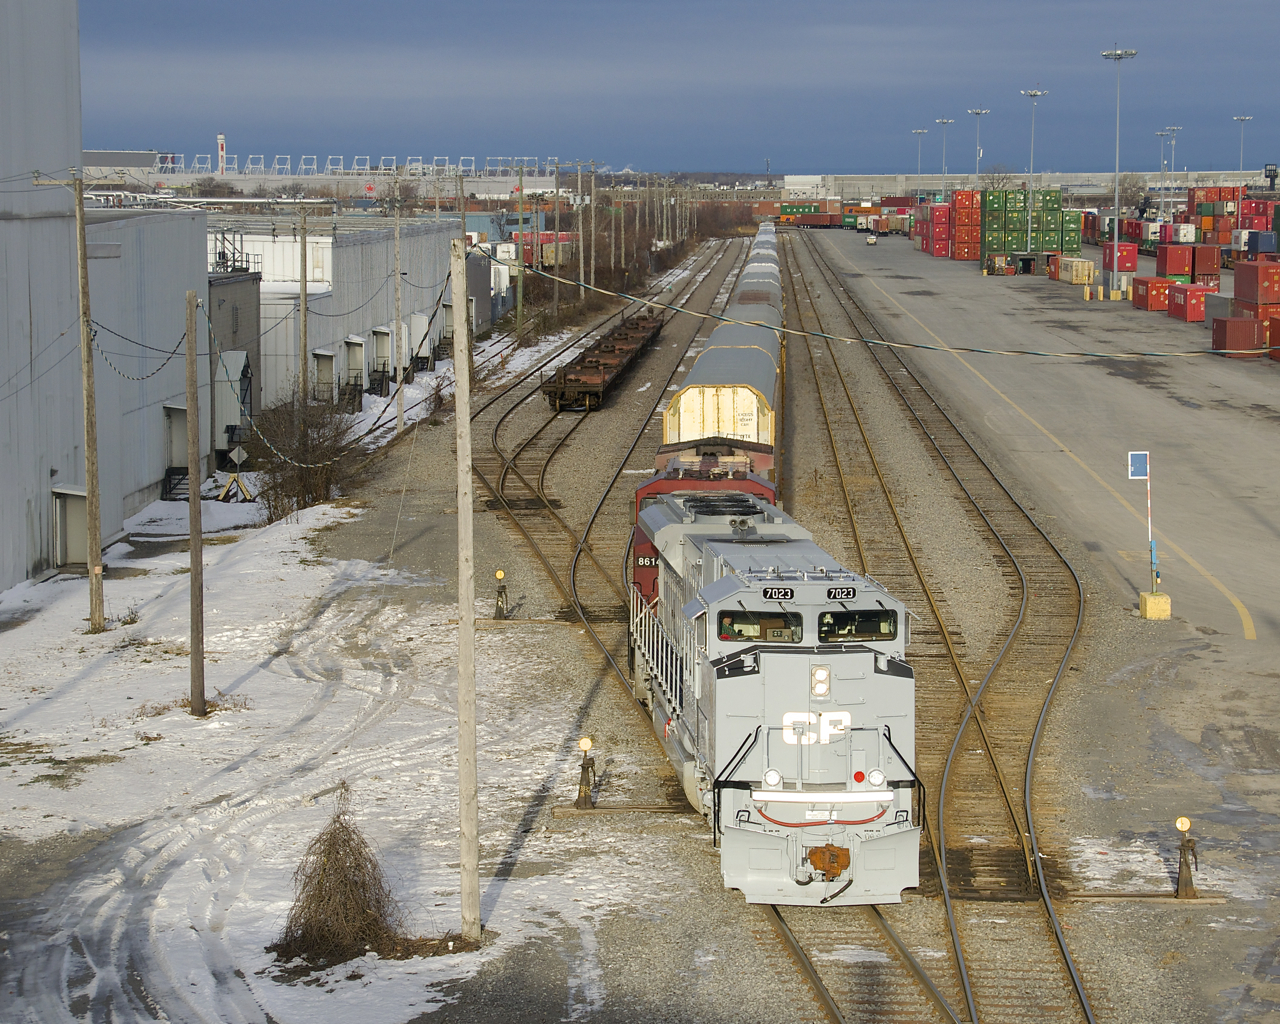 The first of CP's military units to arrive in Montreal (CP 7023) leads CP 112 (with CP 8614 trailing), as he sets off cars in the Lachine IMS Yard. CP 7023 is painted in an Air Force-inspired paint scheme and features an American flag on one side and a Canadian flag on the other side.